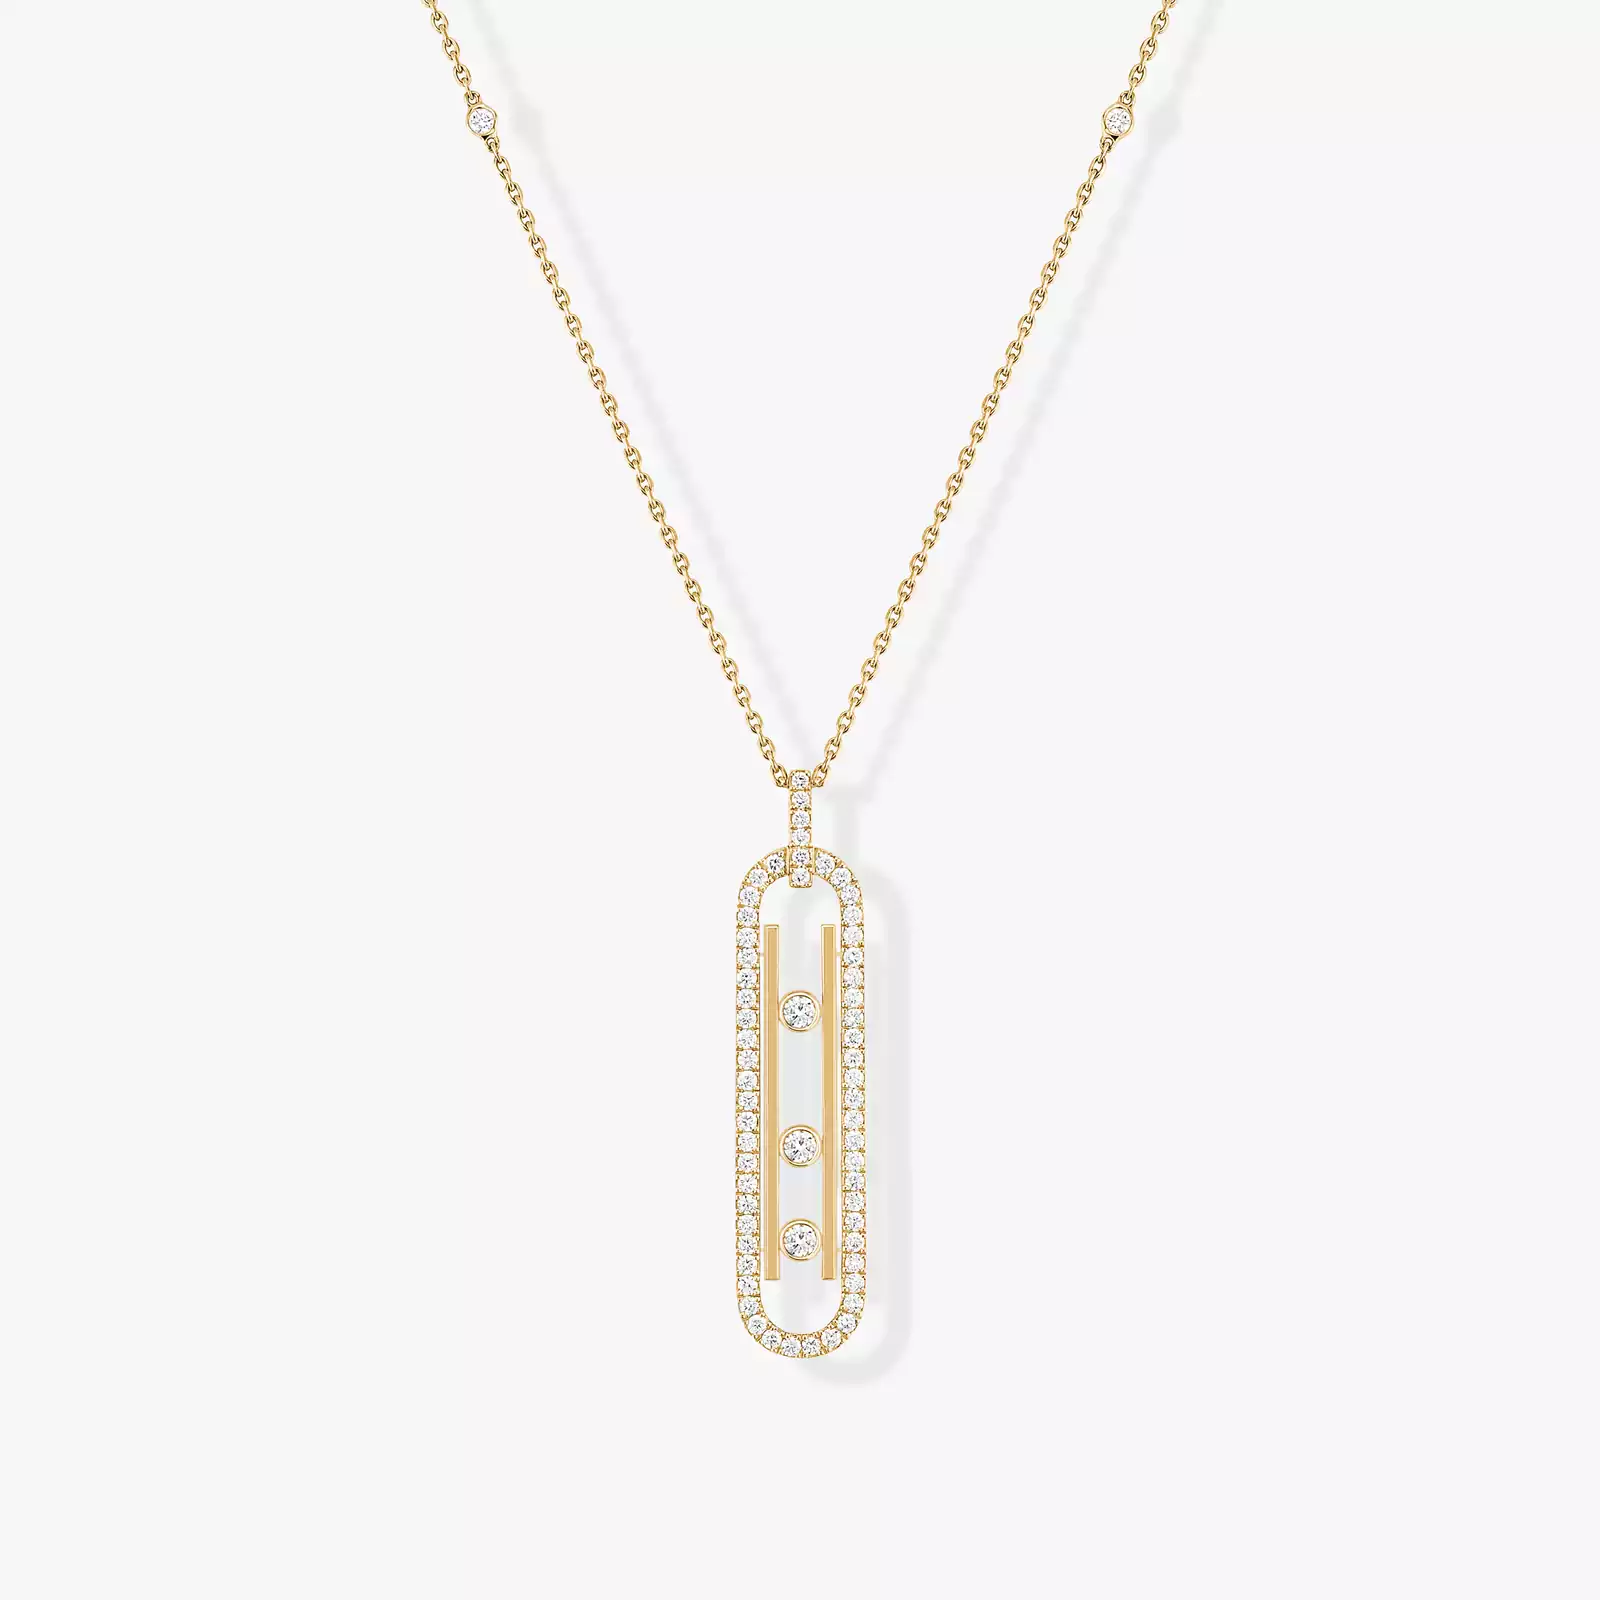 Move 10th SM Necklace Yellow Gold For Her Diamond Necklace 10032-YG